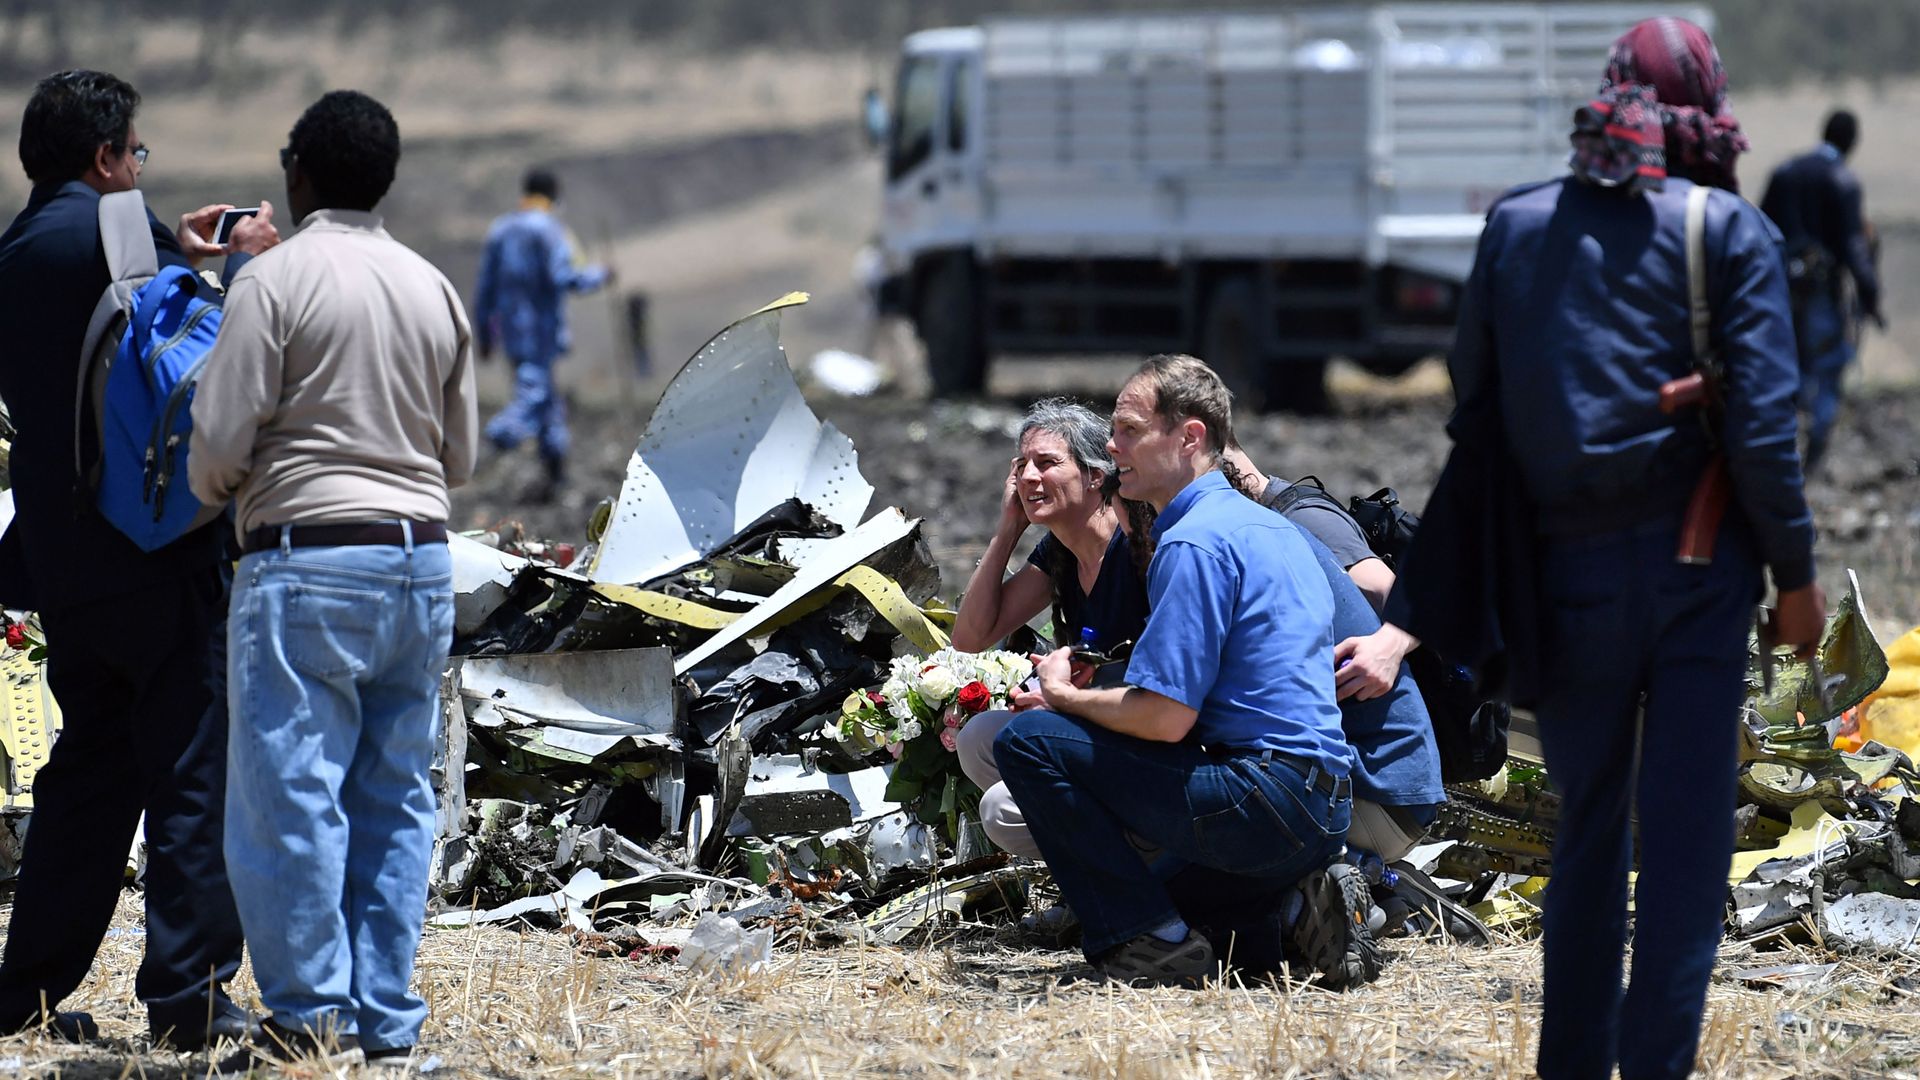 Relatives of the victims of the Ethiopian plane crash sit in a field among debris, looking concerned. 